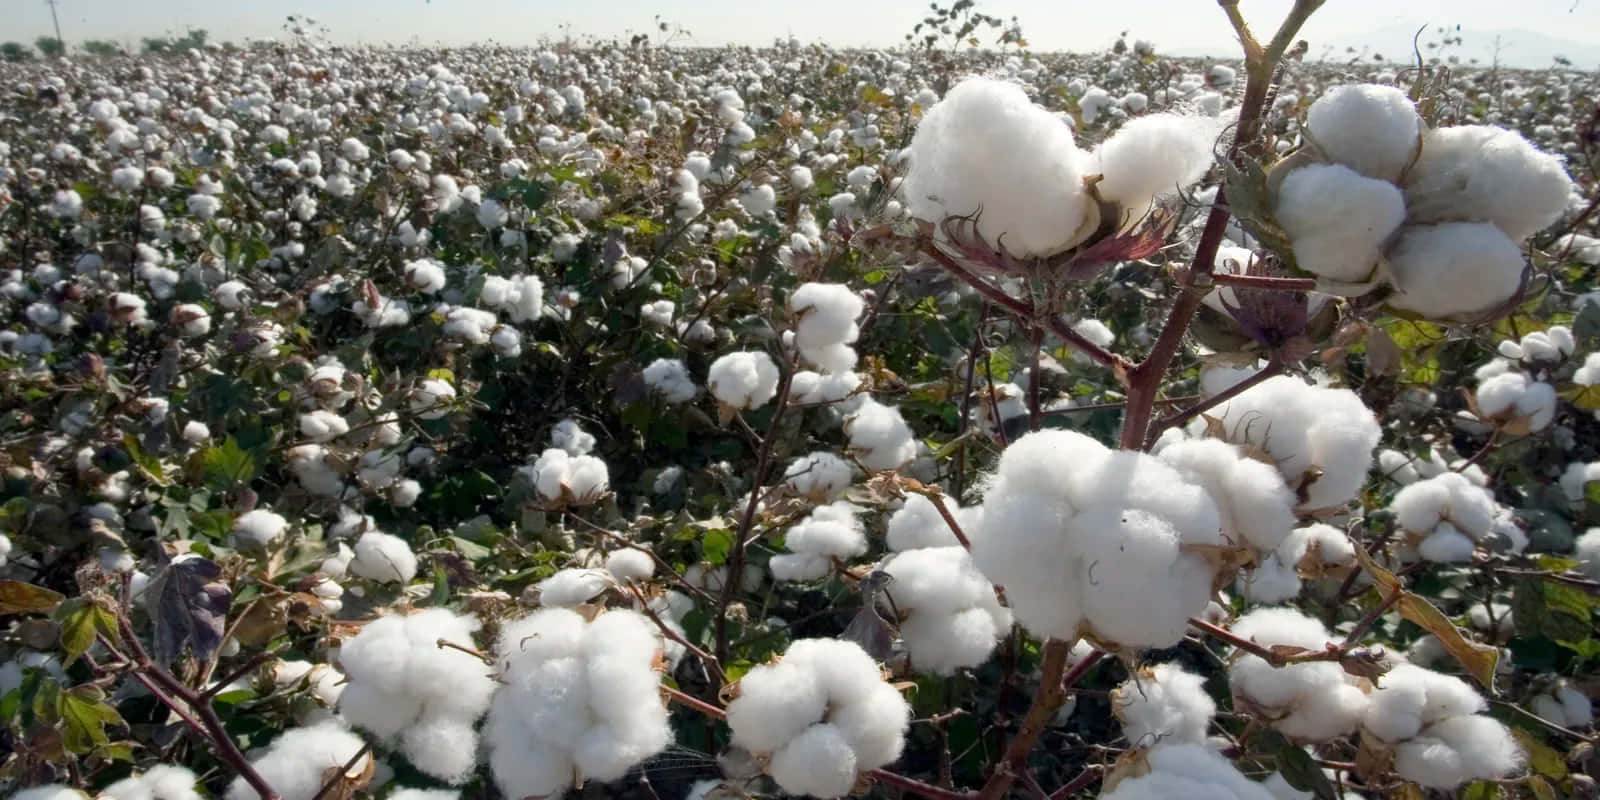 100+] Cotton Field Pictures | Wallpapers.com